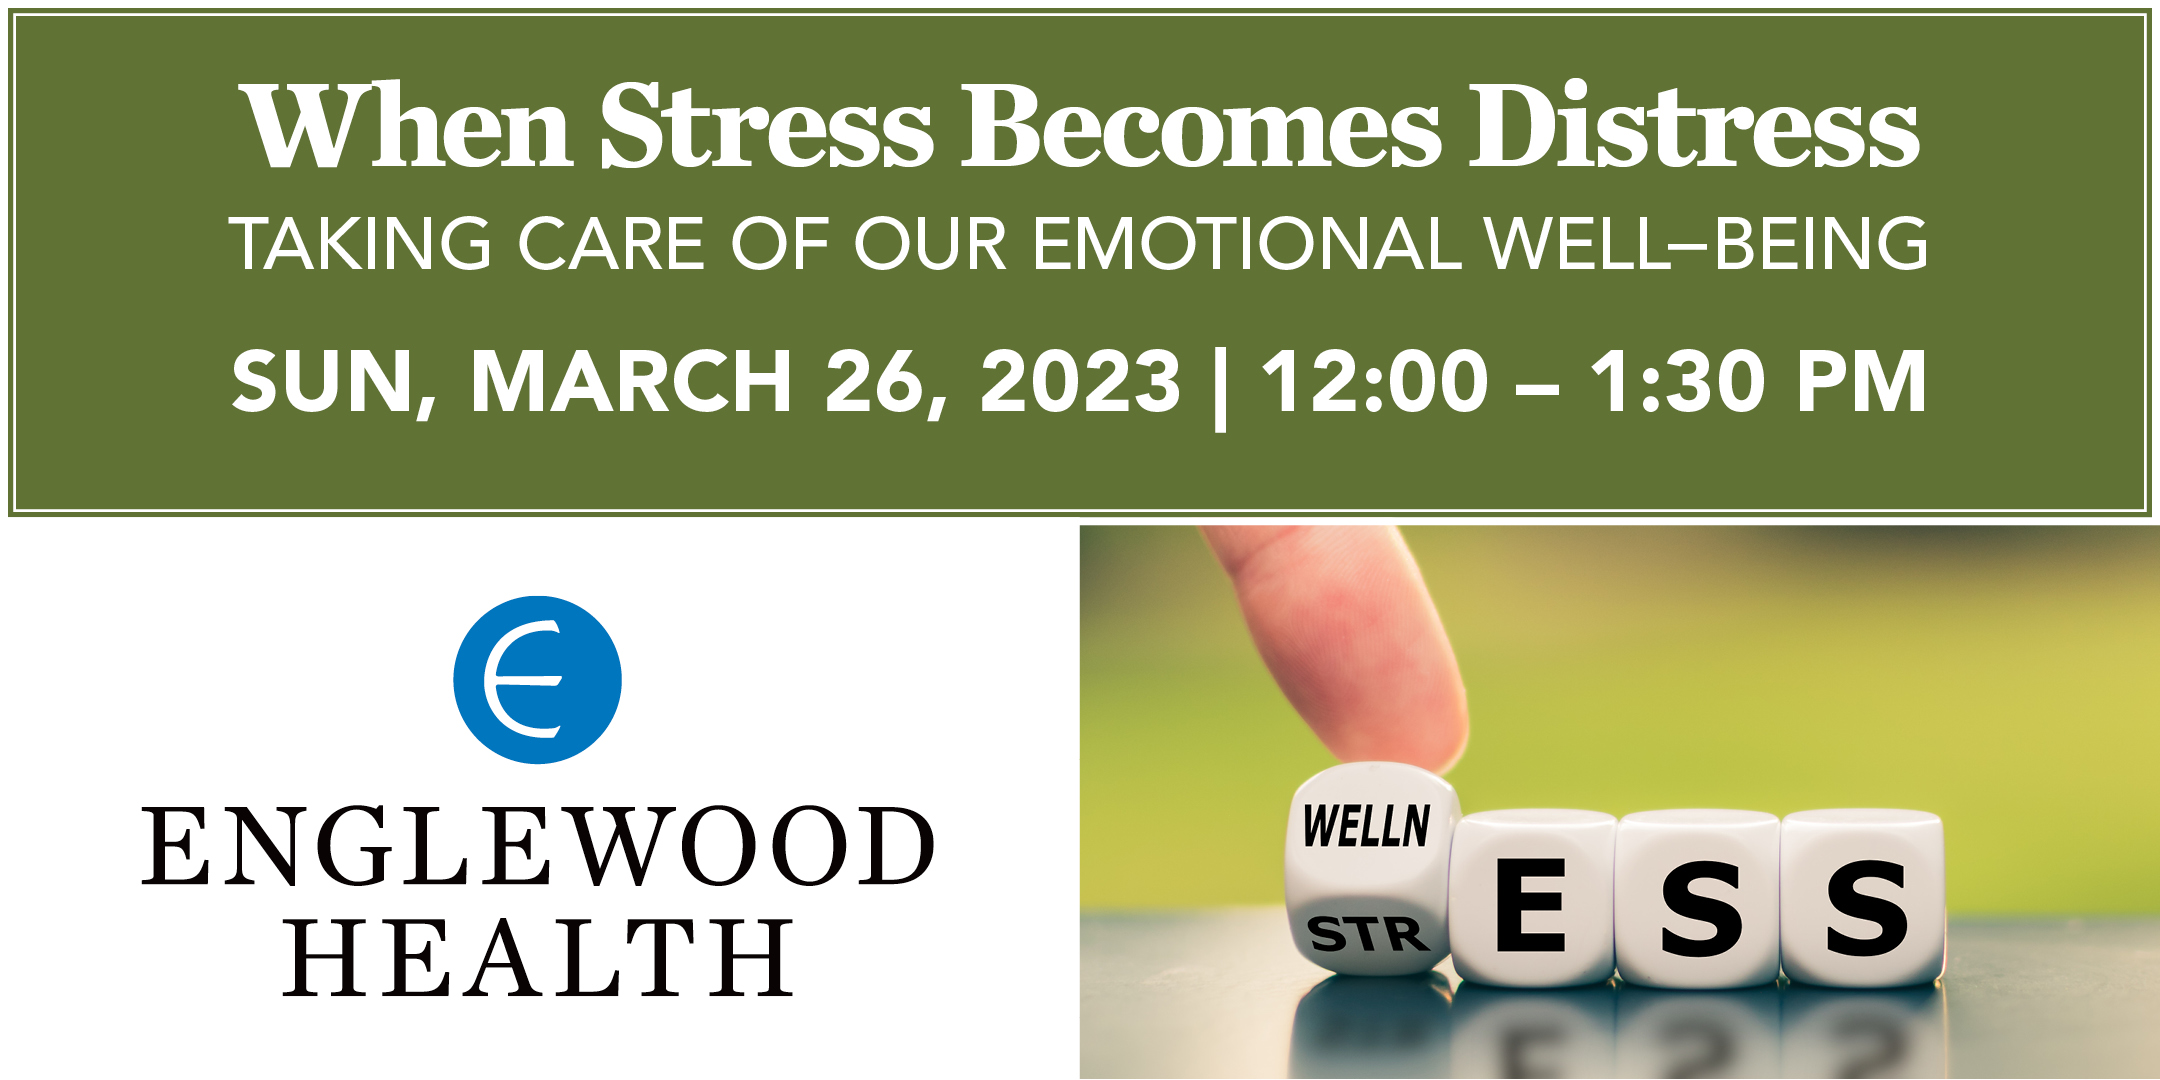 More info: When Stress Becomes Distress: Taking Care of Our Emotional Well-Being